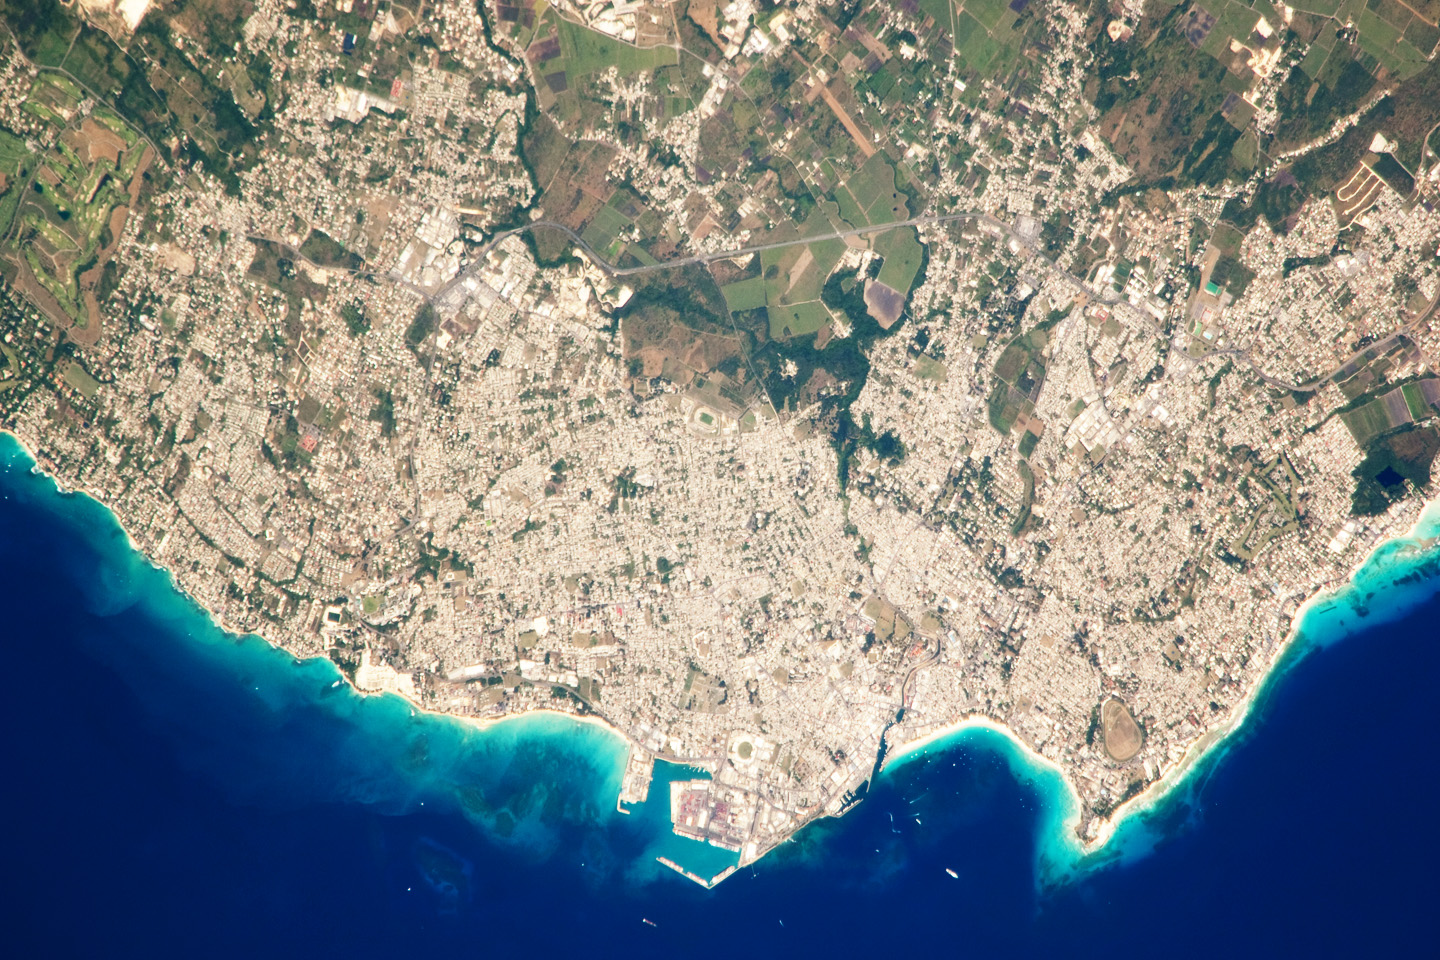 Greater Bridgetown Area, Barbados - related image preview